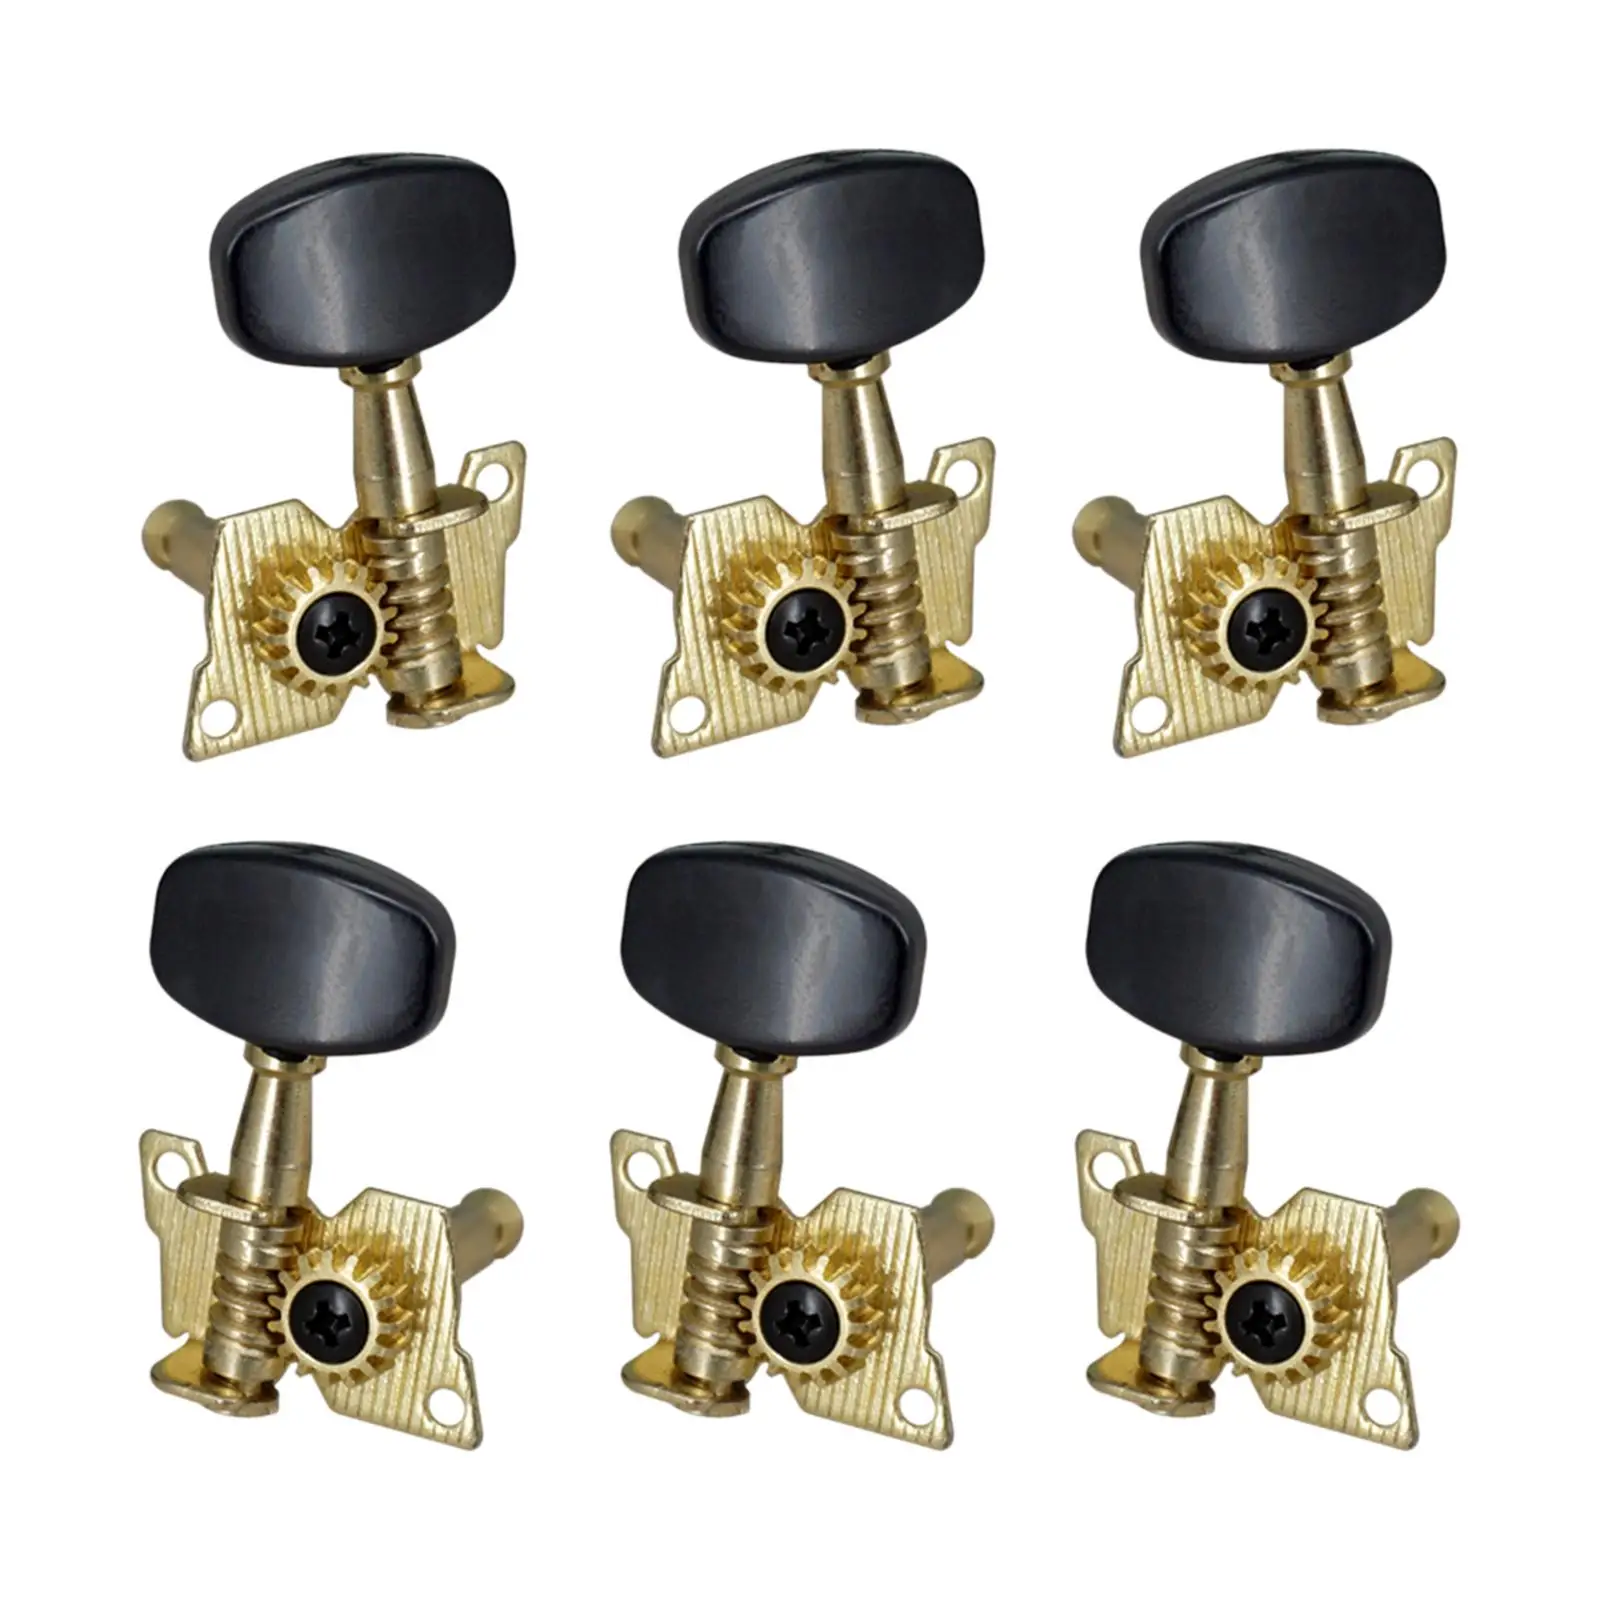 6x 3L3R Guitar Tuner Pegs Right Left Guitar Tuning Pegs for Acoustic Electric Guitar